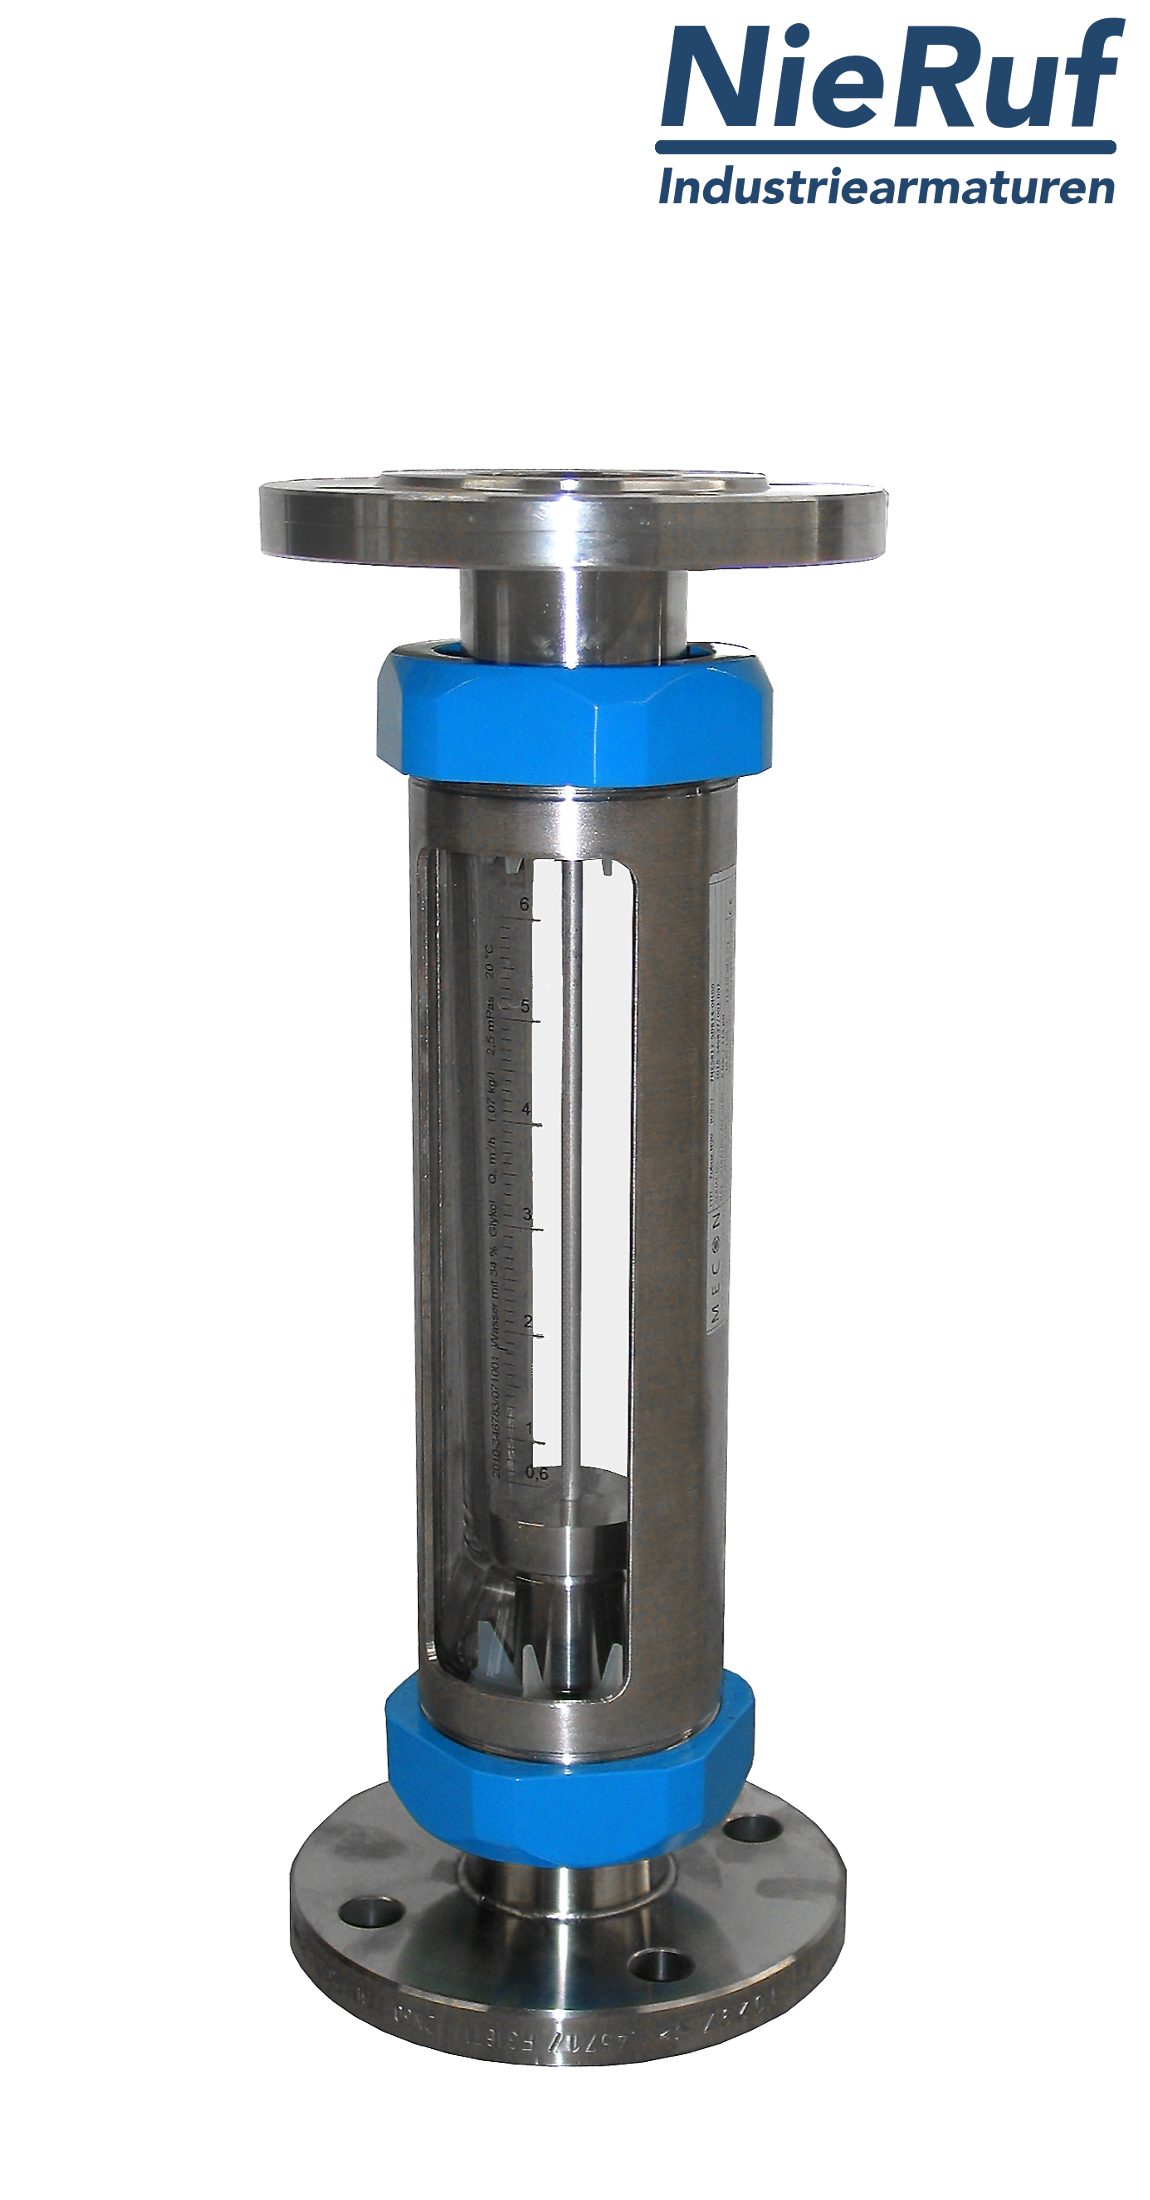 Variable area flowmeter stainless steel + borosilicate flange DN50 1000.0 - 10000 l/h water FKM